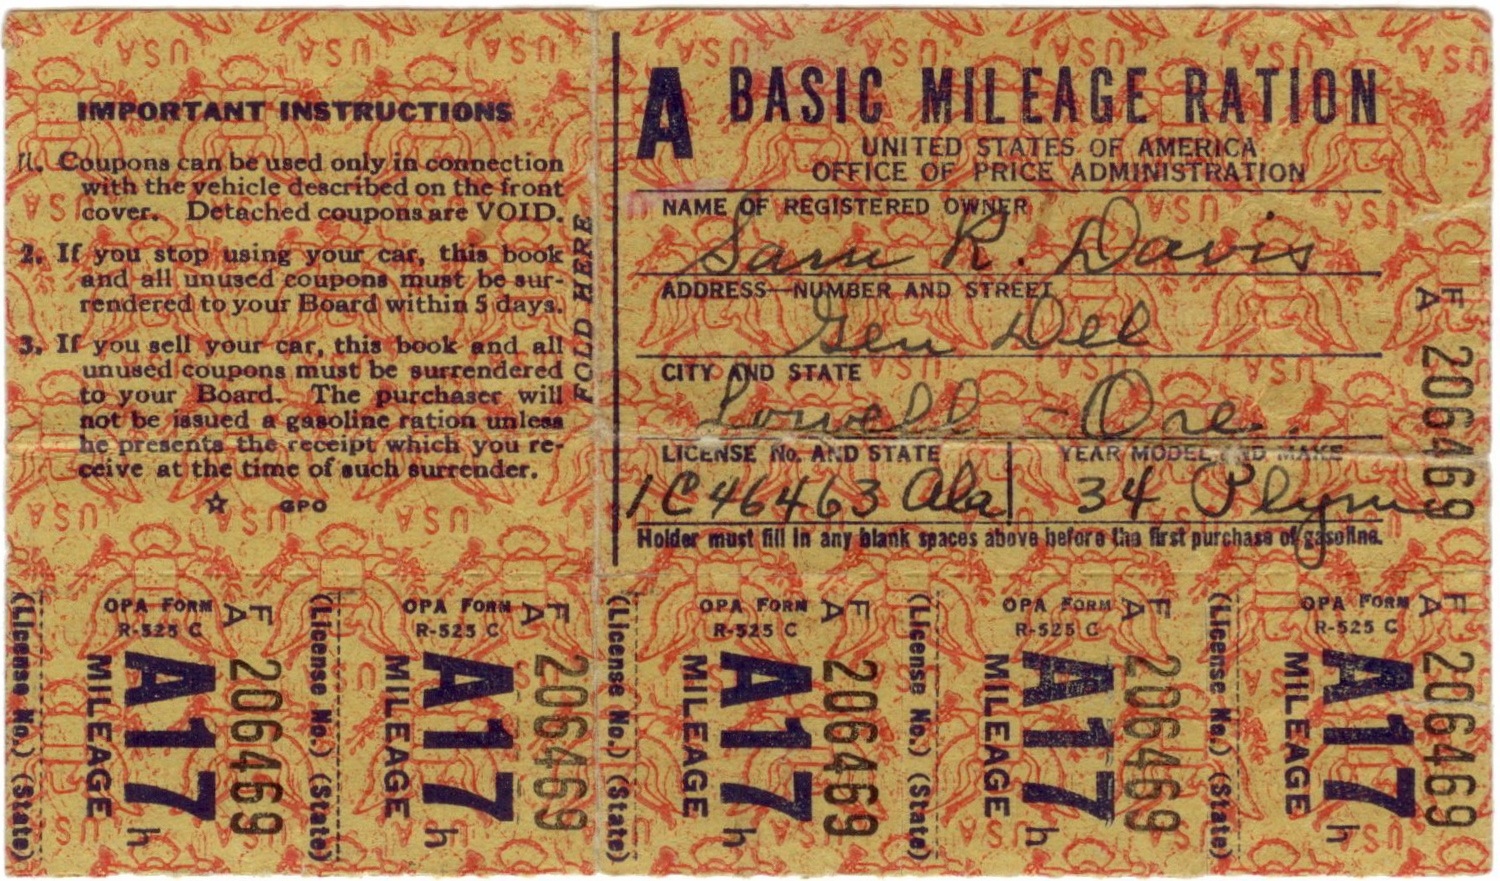 WWII_USA_Basic_Mileage_Ration_(front).jpg